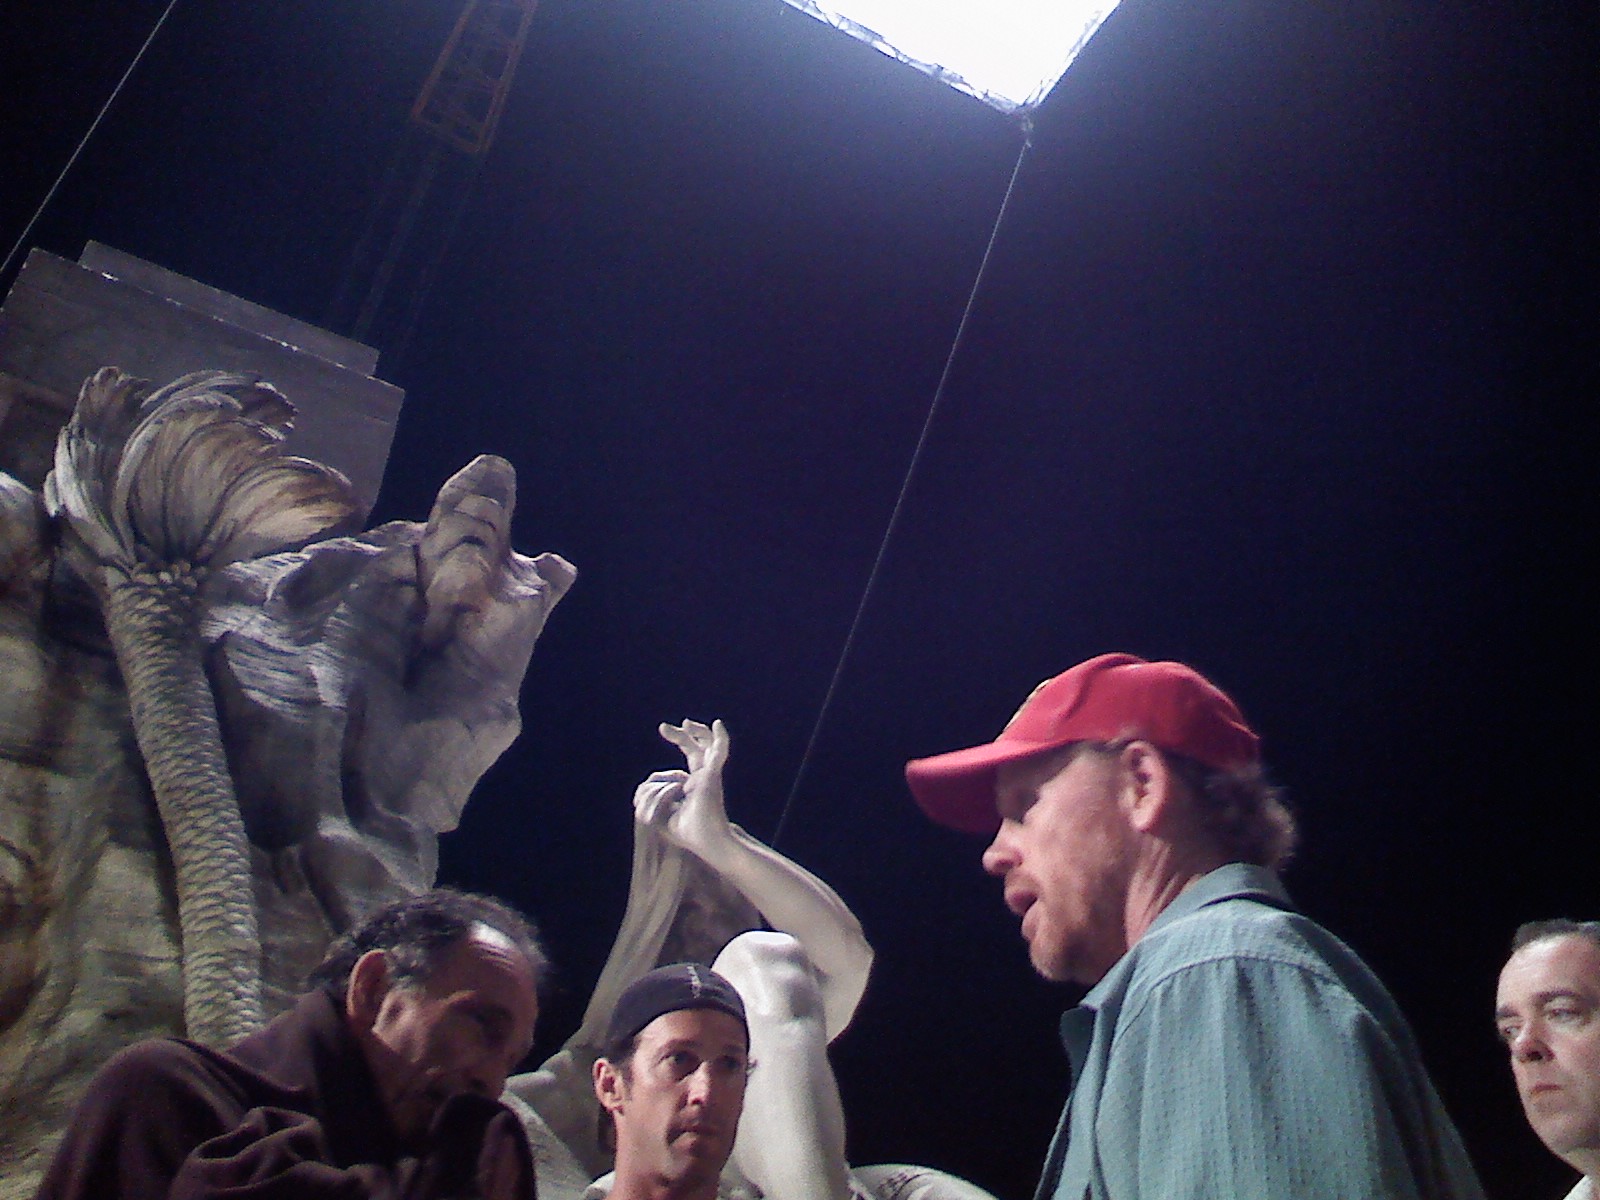 Ron Howard directing Marco fiorini on set of Angels and demon 2008